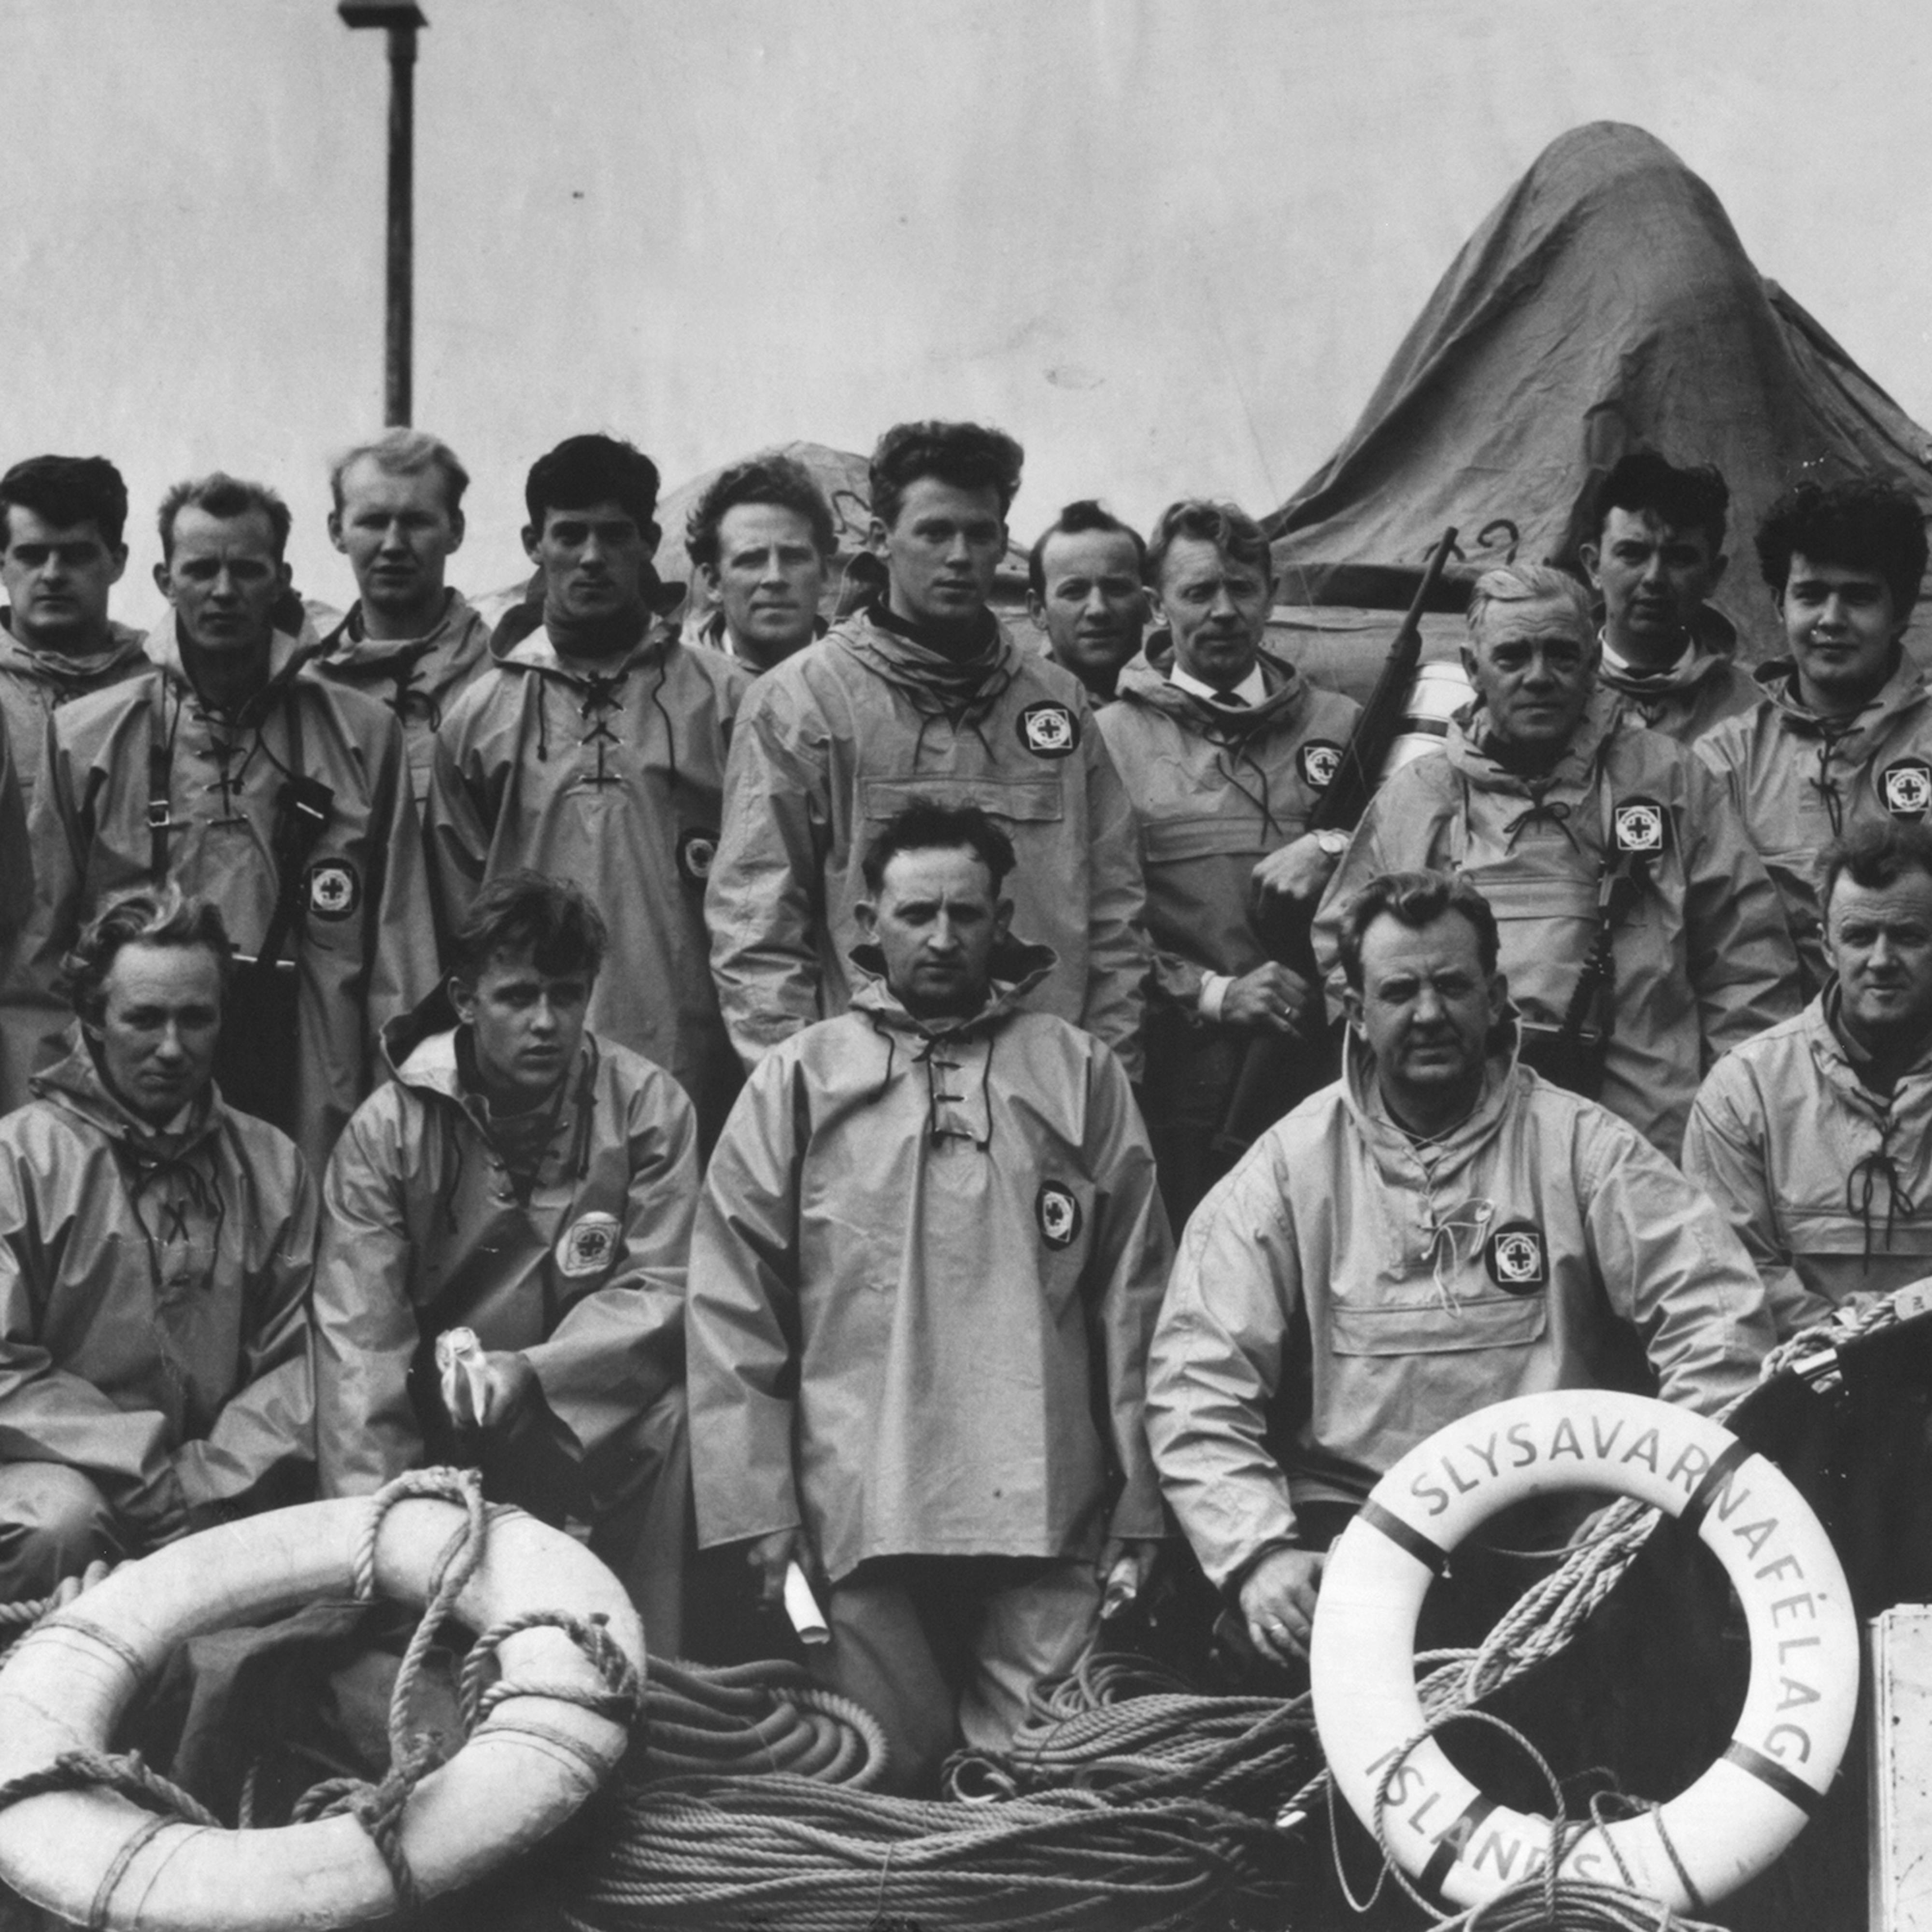 Icelandic Search and rescue team from 1967